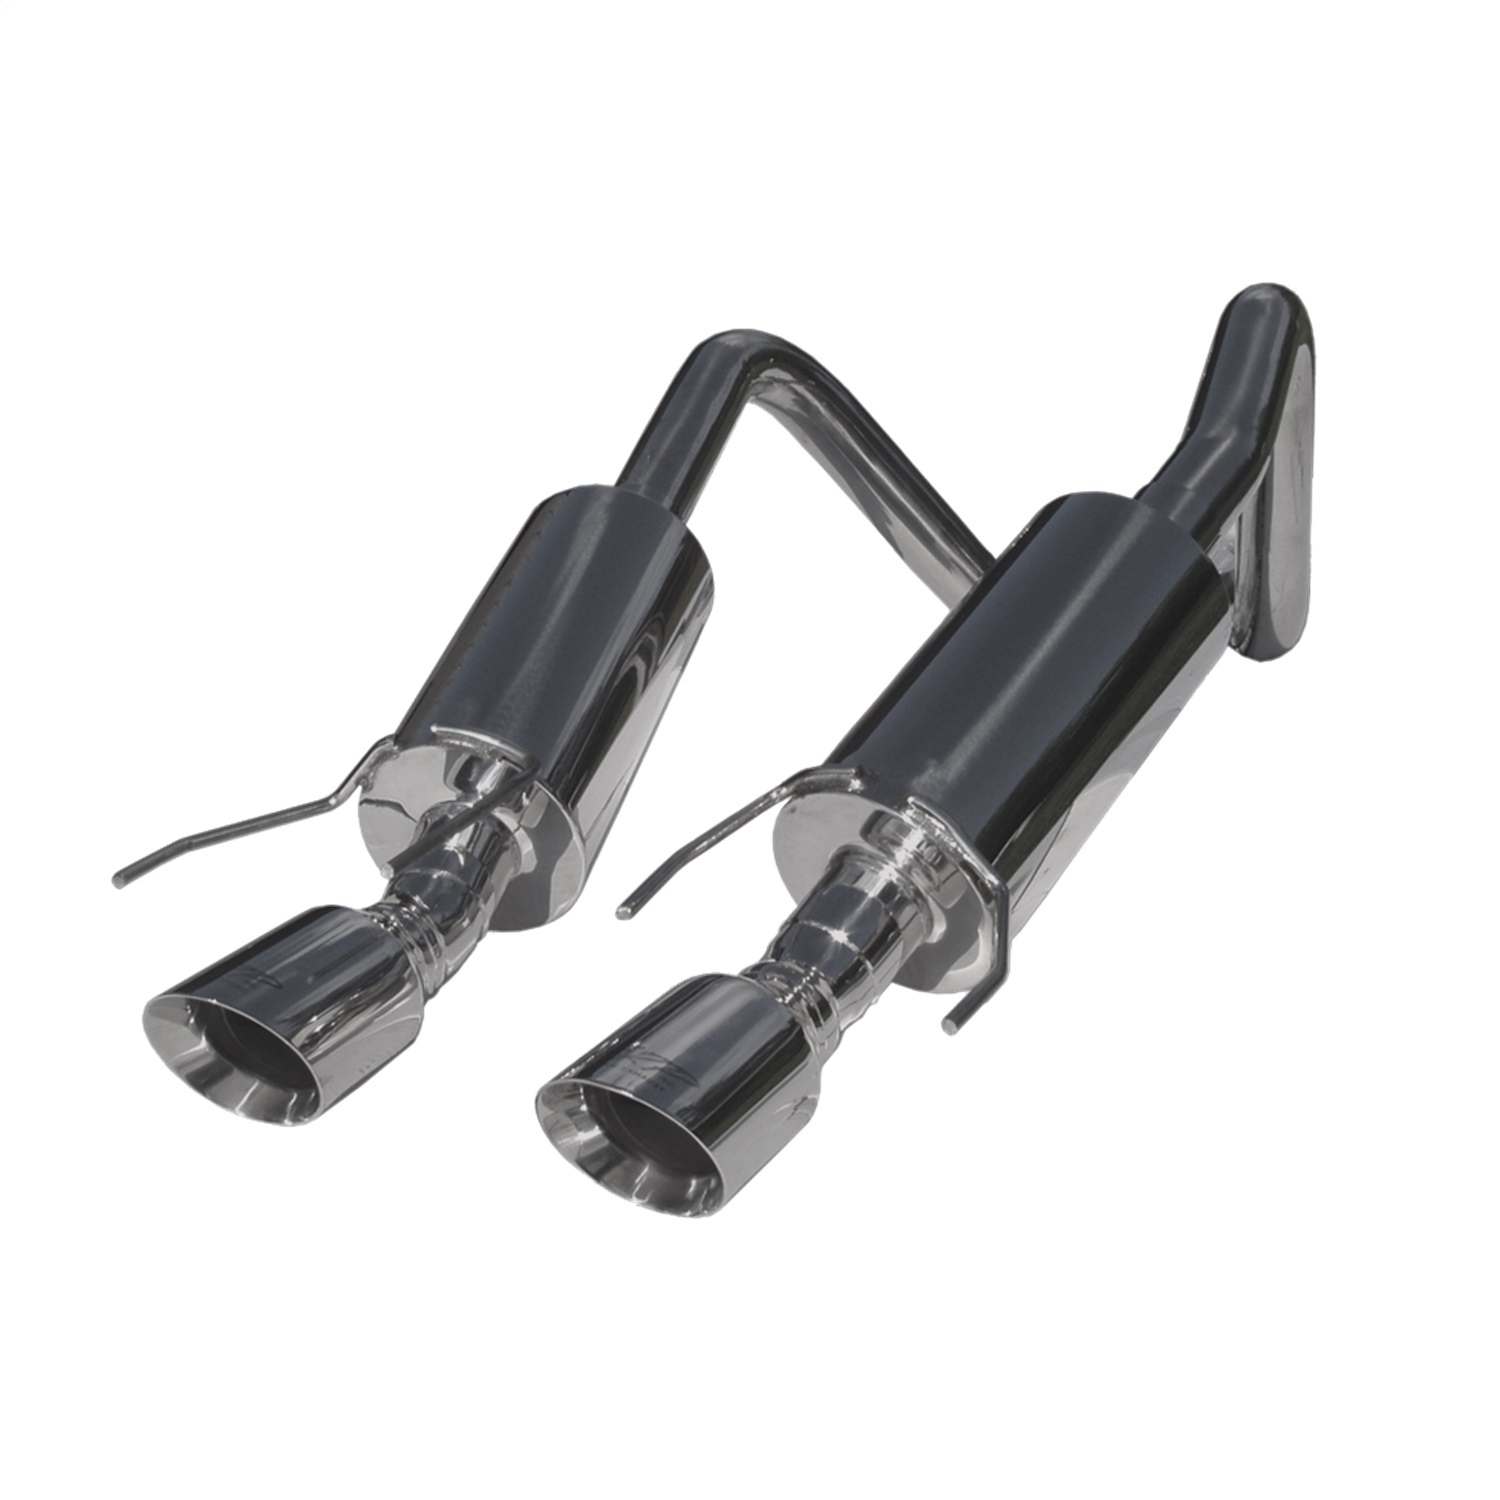 MBRP Exhaust MBRP Exhaust S7000304 Pro Series; Dual Muffler Axle Back Exhaust System